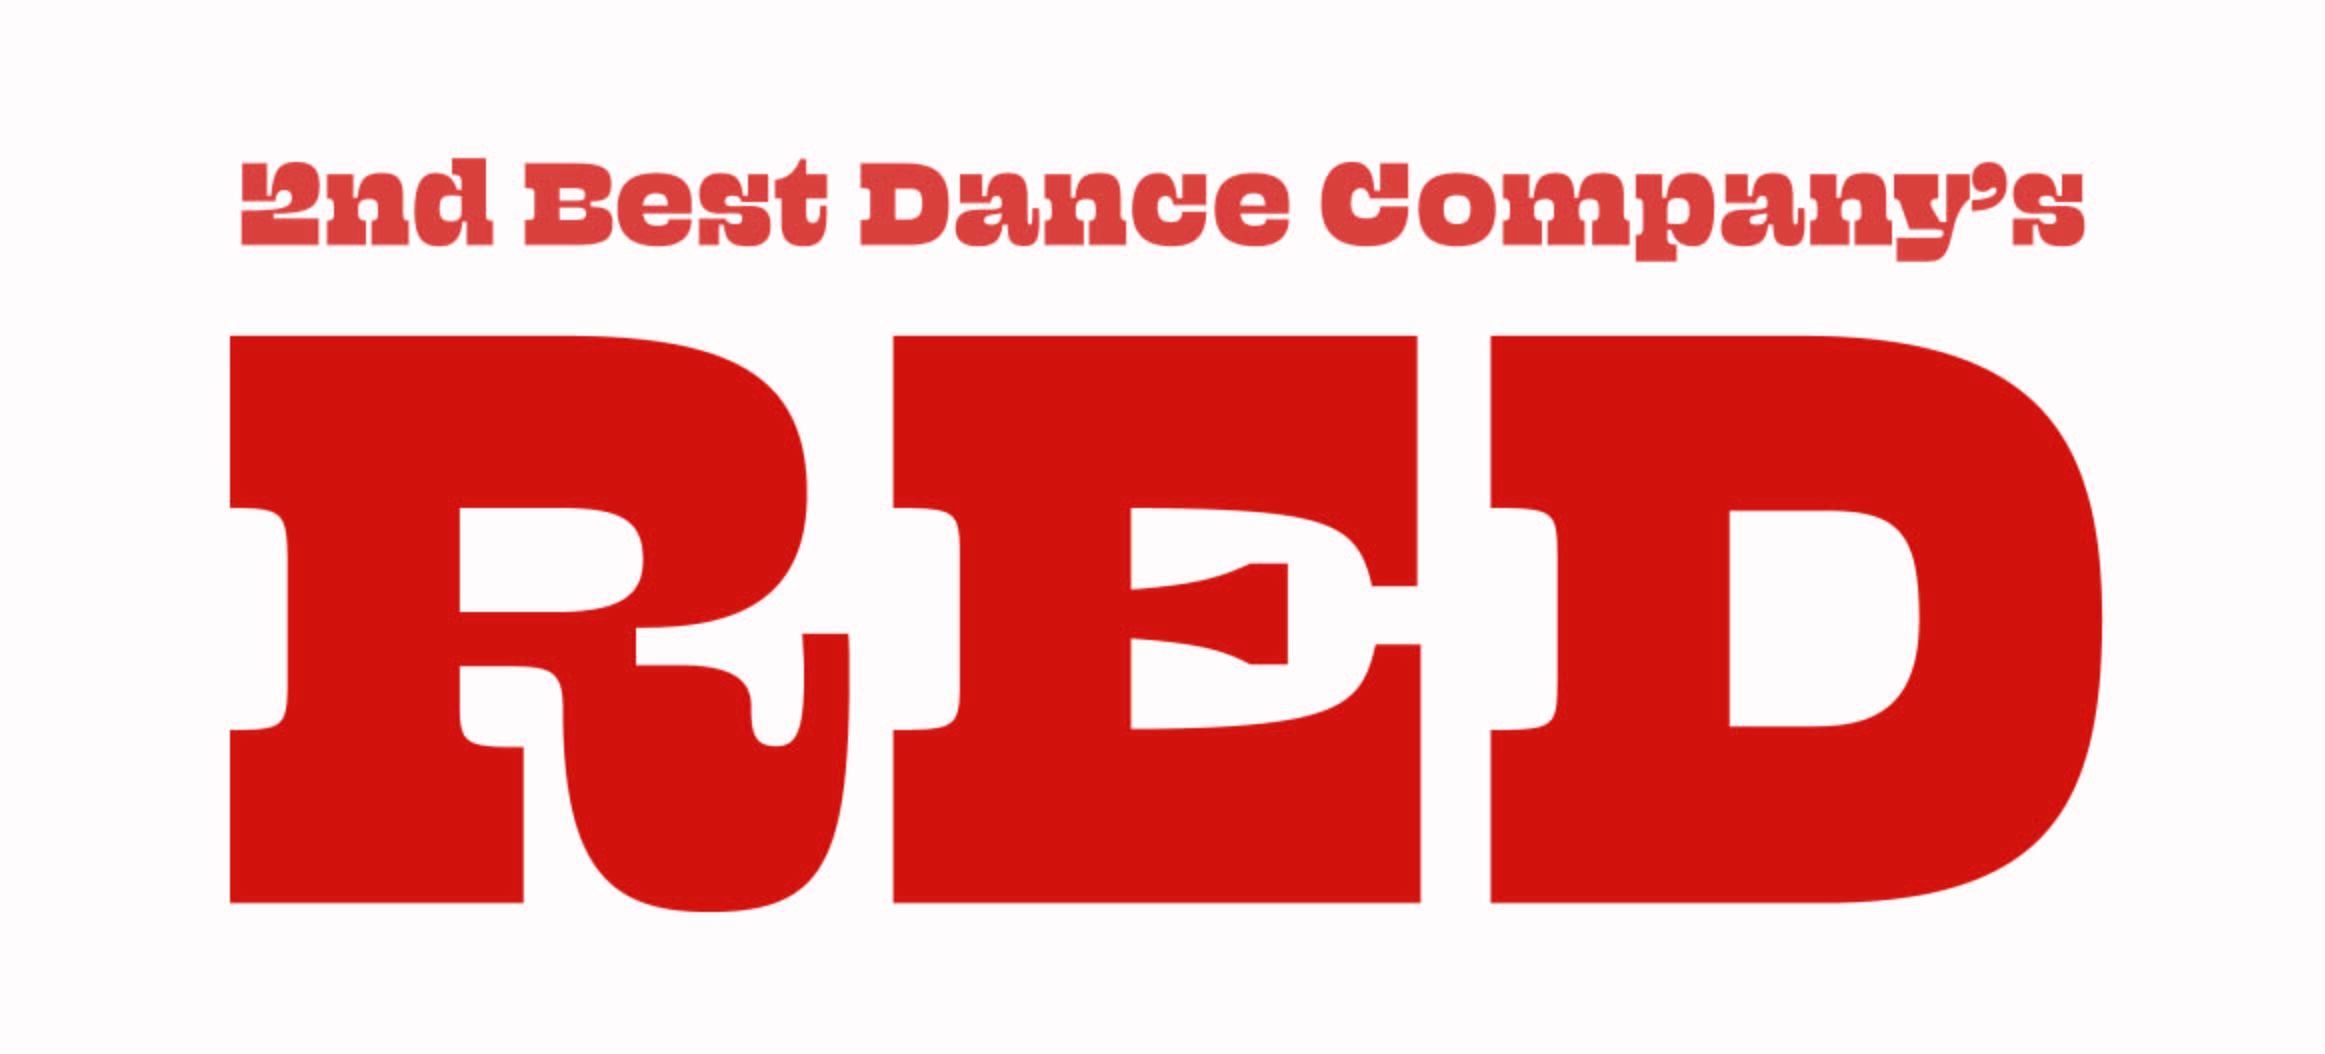 Red text says "2nd Best Dance Company's RED"